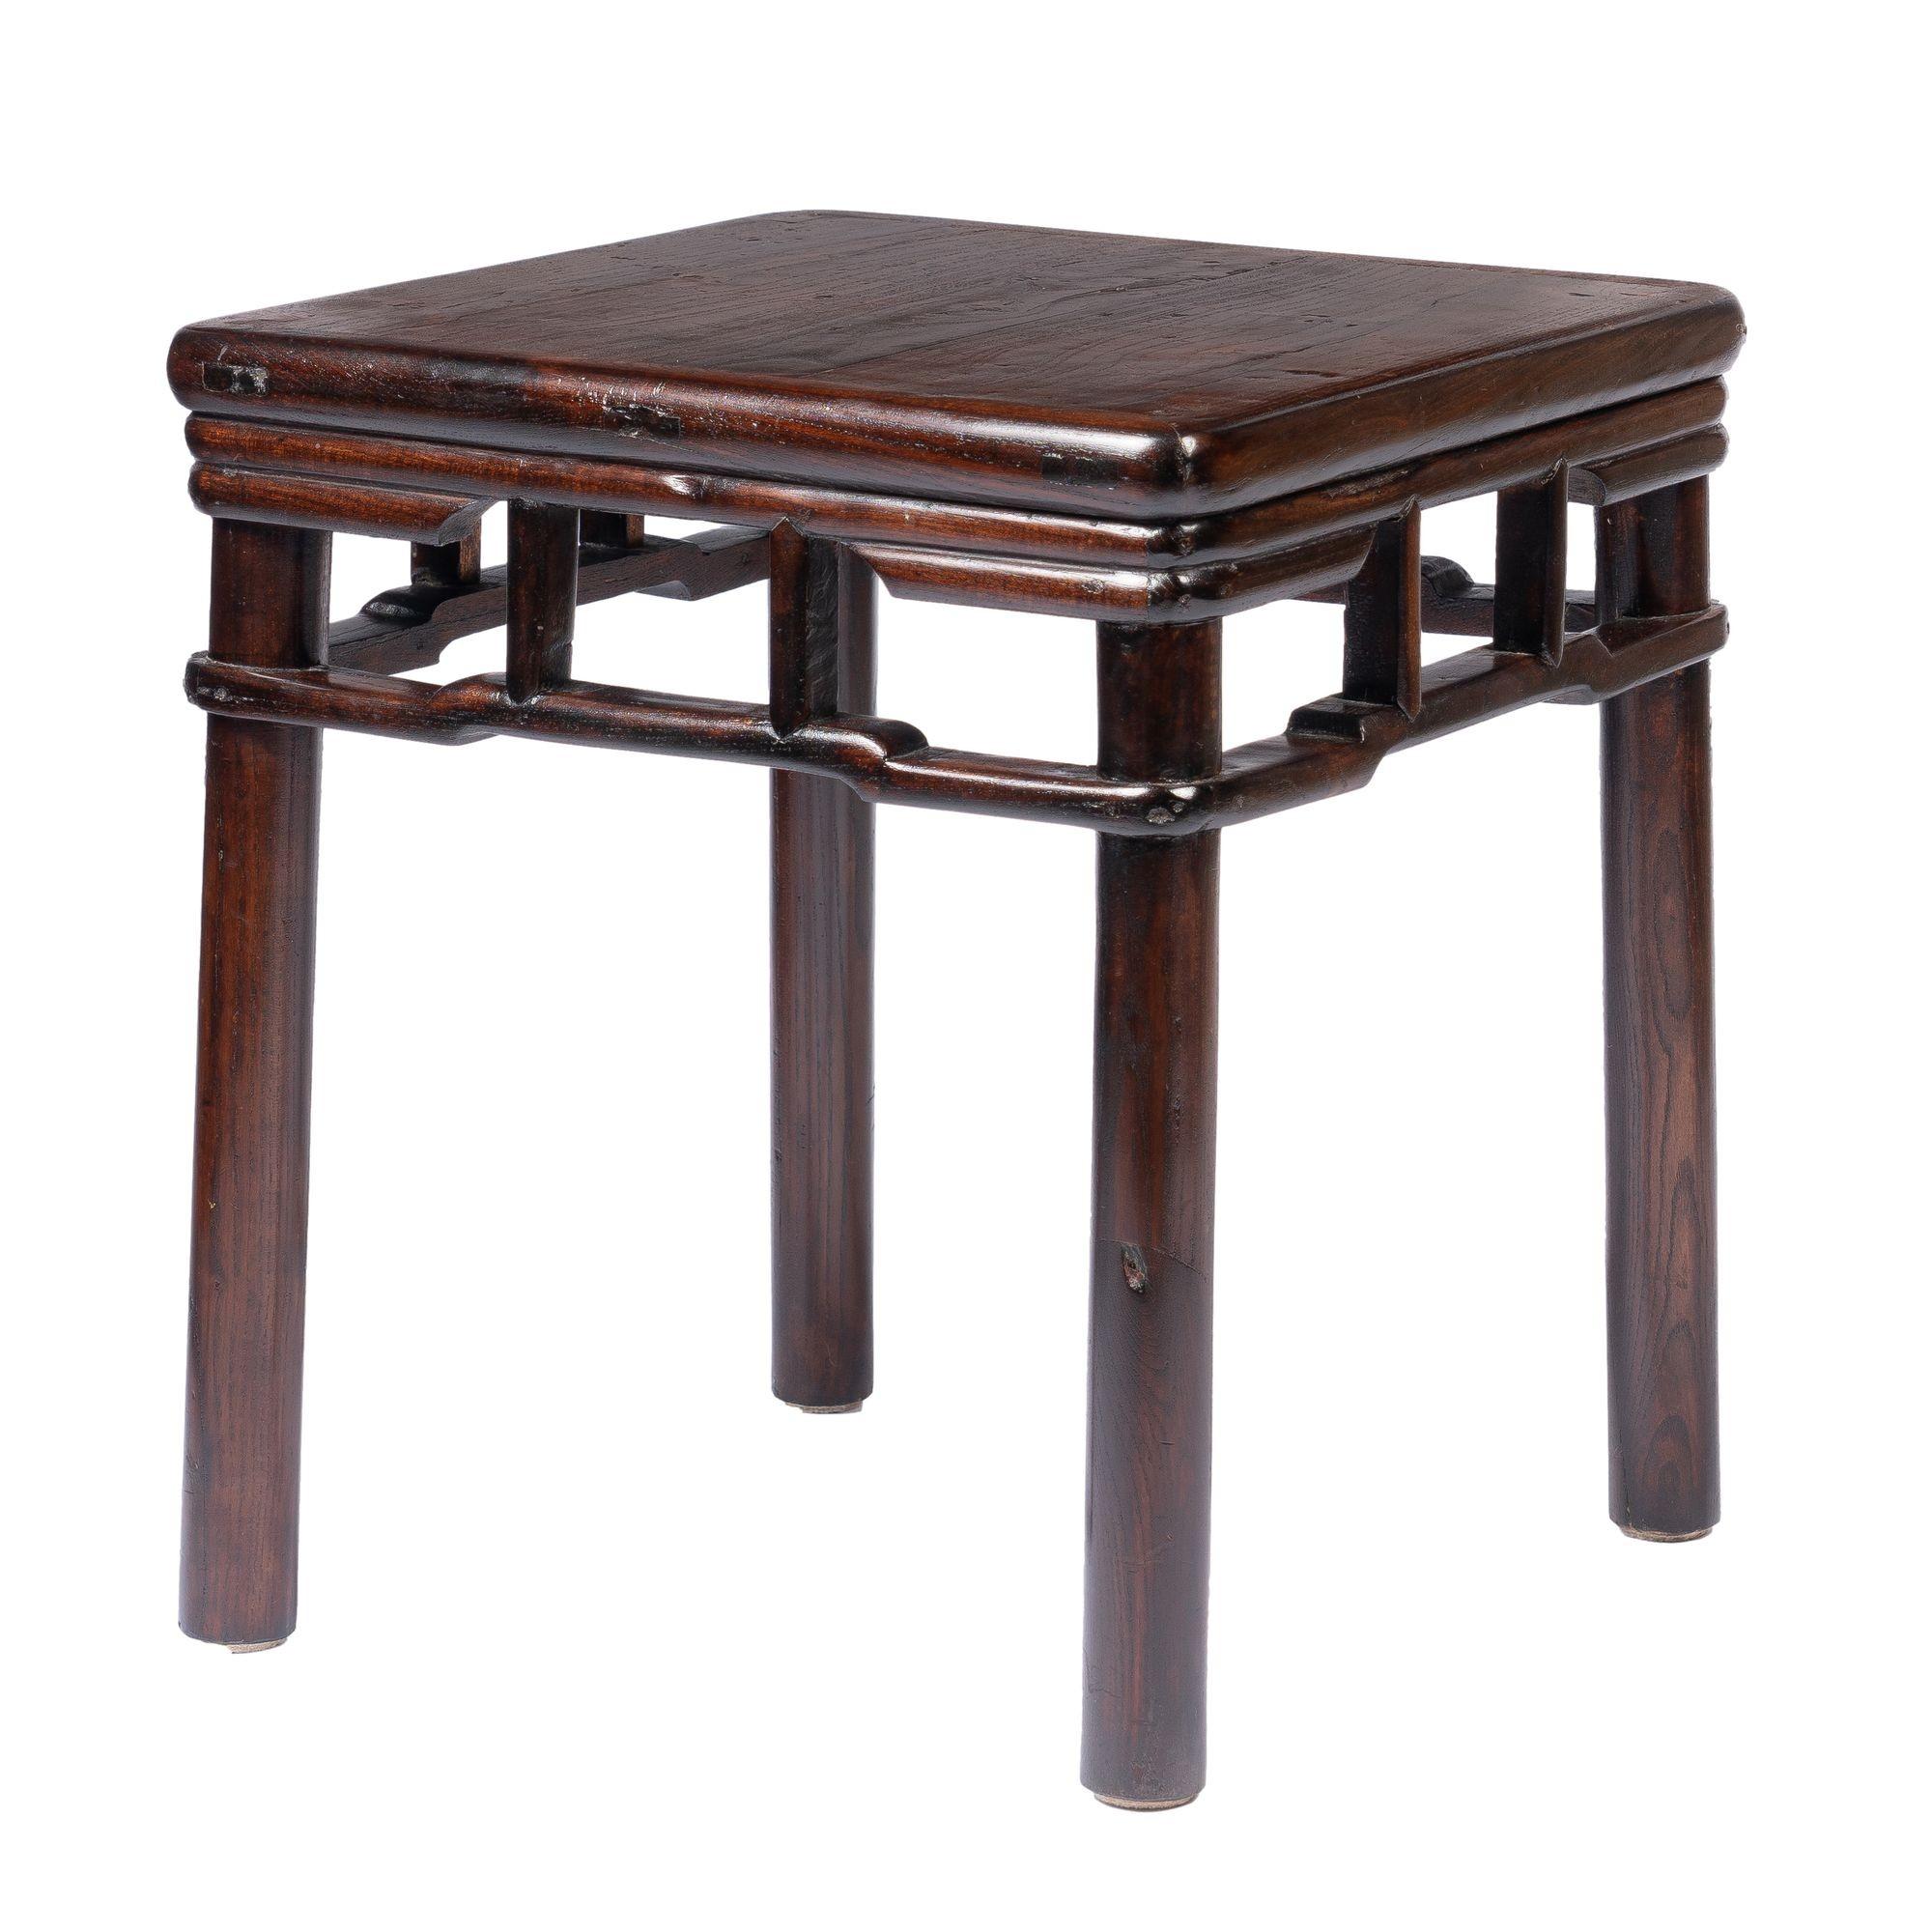 Pair of Chinese Elm Stools with Hump Back Rail, 1780-1820 For Sale 1